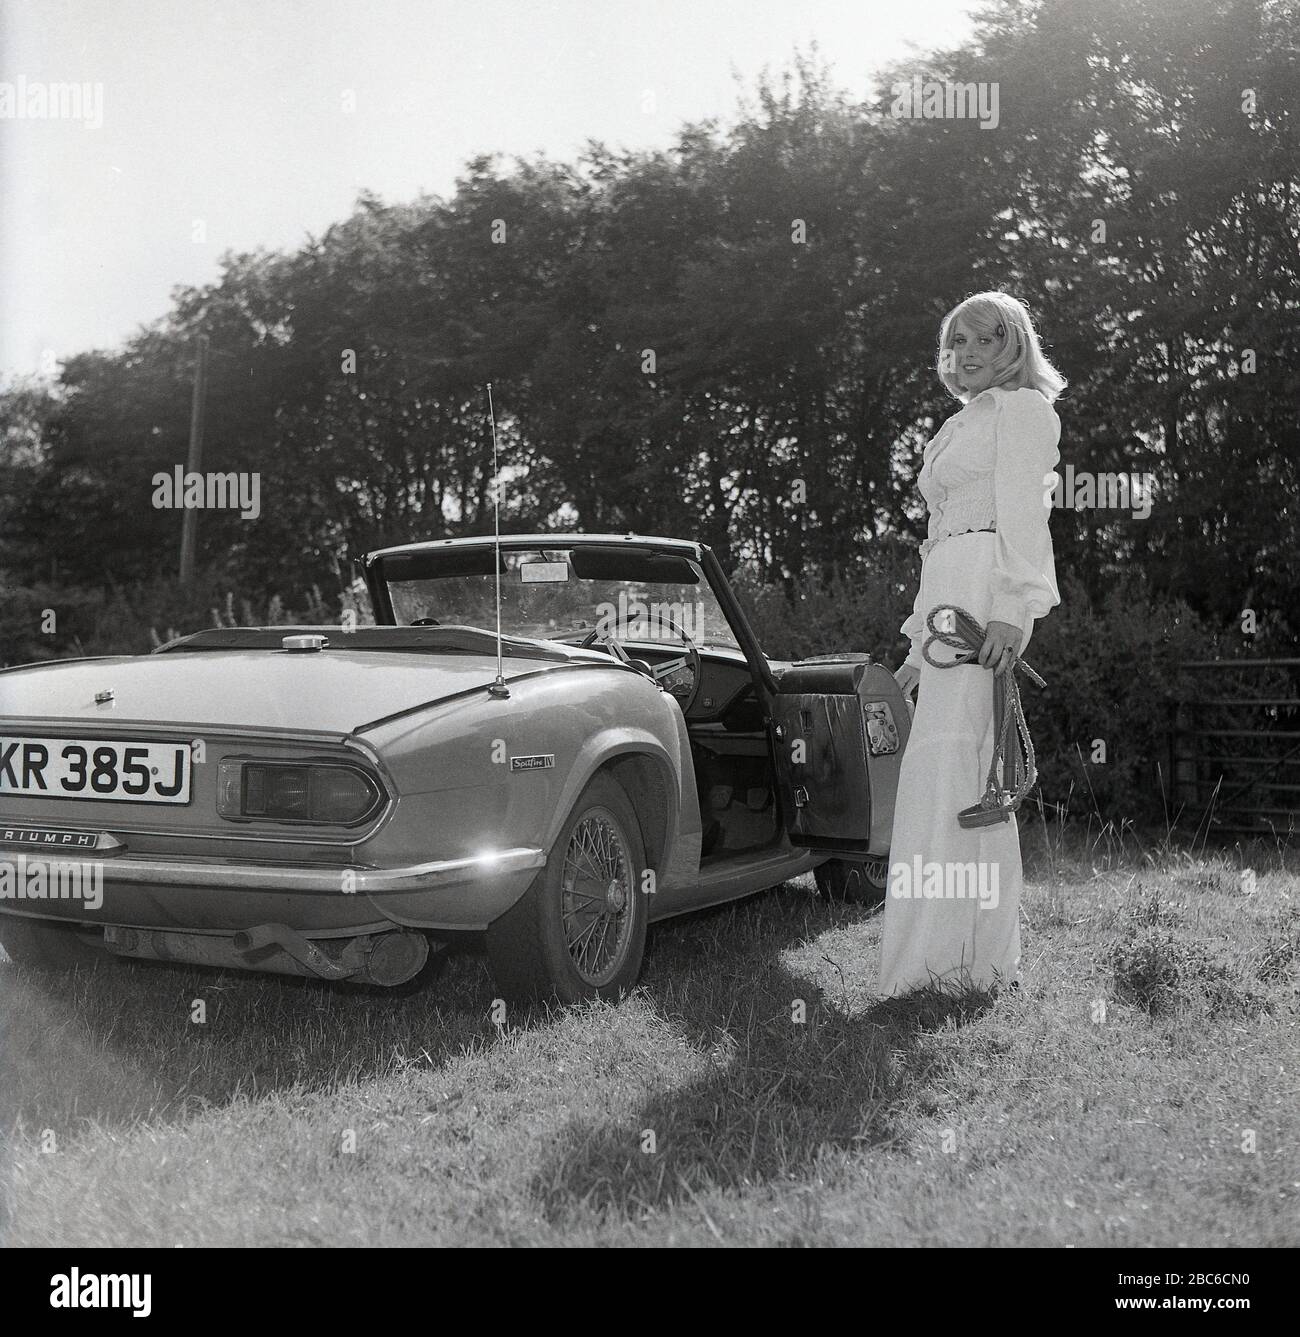 1970s, historical, Outside in a sun-lit field, an attractive blonde woman in a white top and bell-bottomed trousers, standing beside her open-top sports car, a Triumph Spitfire IV, with wire wheels, England, UK. First introduced in 1962, based on a design by Giovanni Michelotti, the Spitfire was a small British two-seat sports car and manufactured up to 1980. The mark IV model shown here was made at Standard-Triumph works (owned by Leyland Motors) in Canley, Coventry between 1970 and 1974 and among other new features from previous models, was a newly designed rear end. Stock Photo